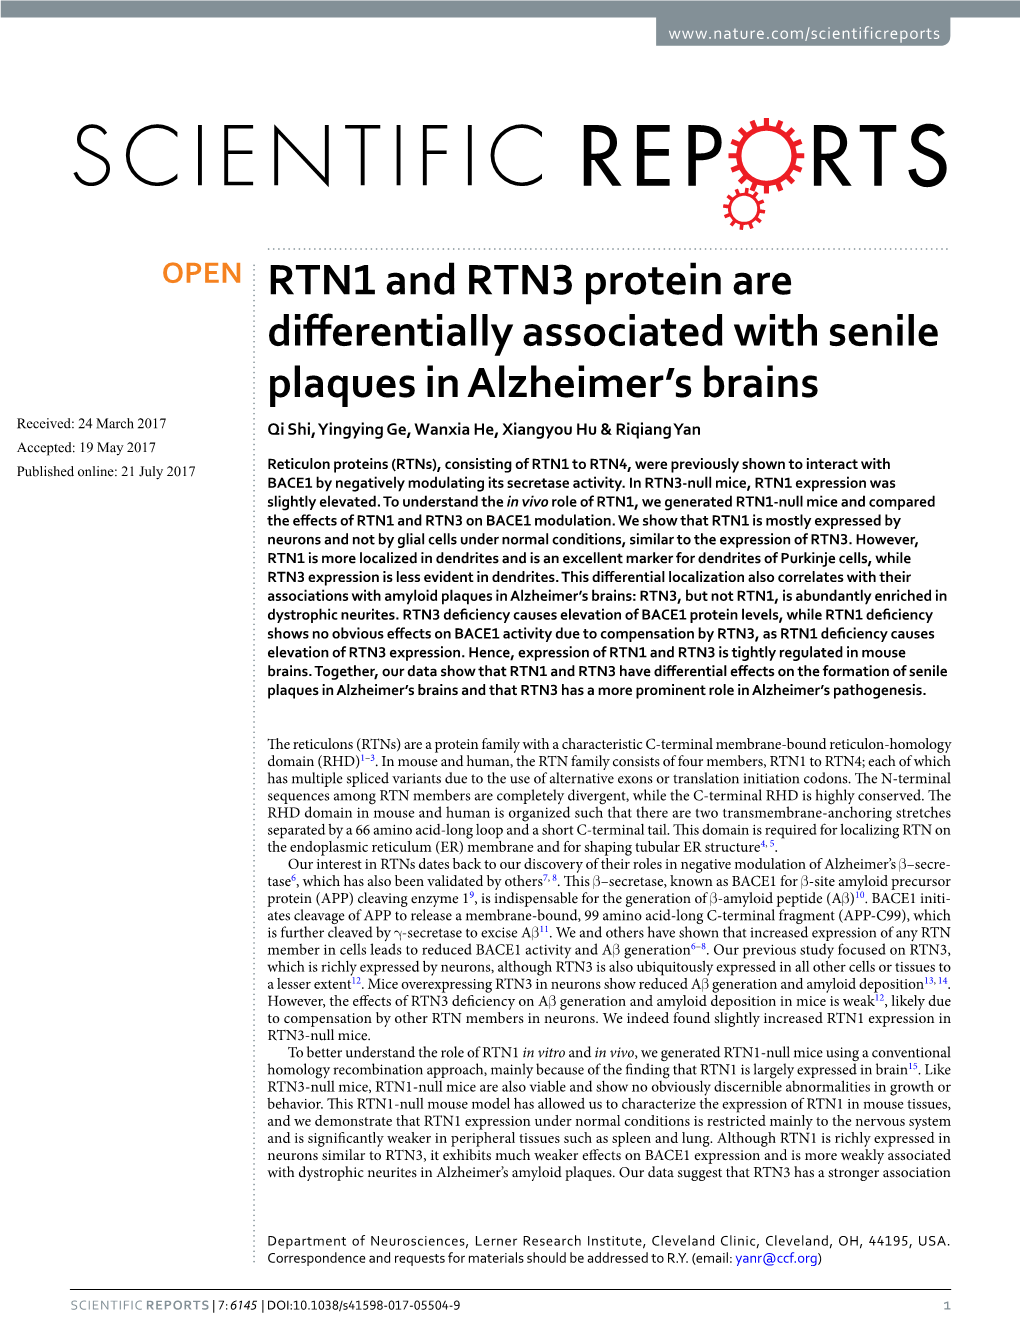 RTN1 and RTN3 Protein Are Differentially Associated with Senile